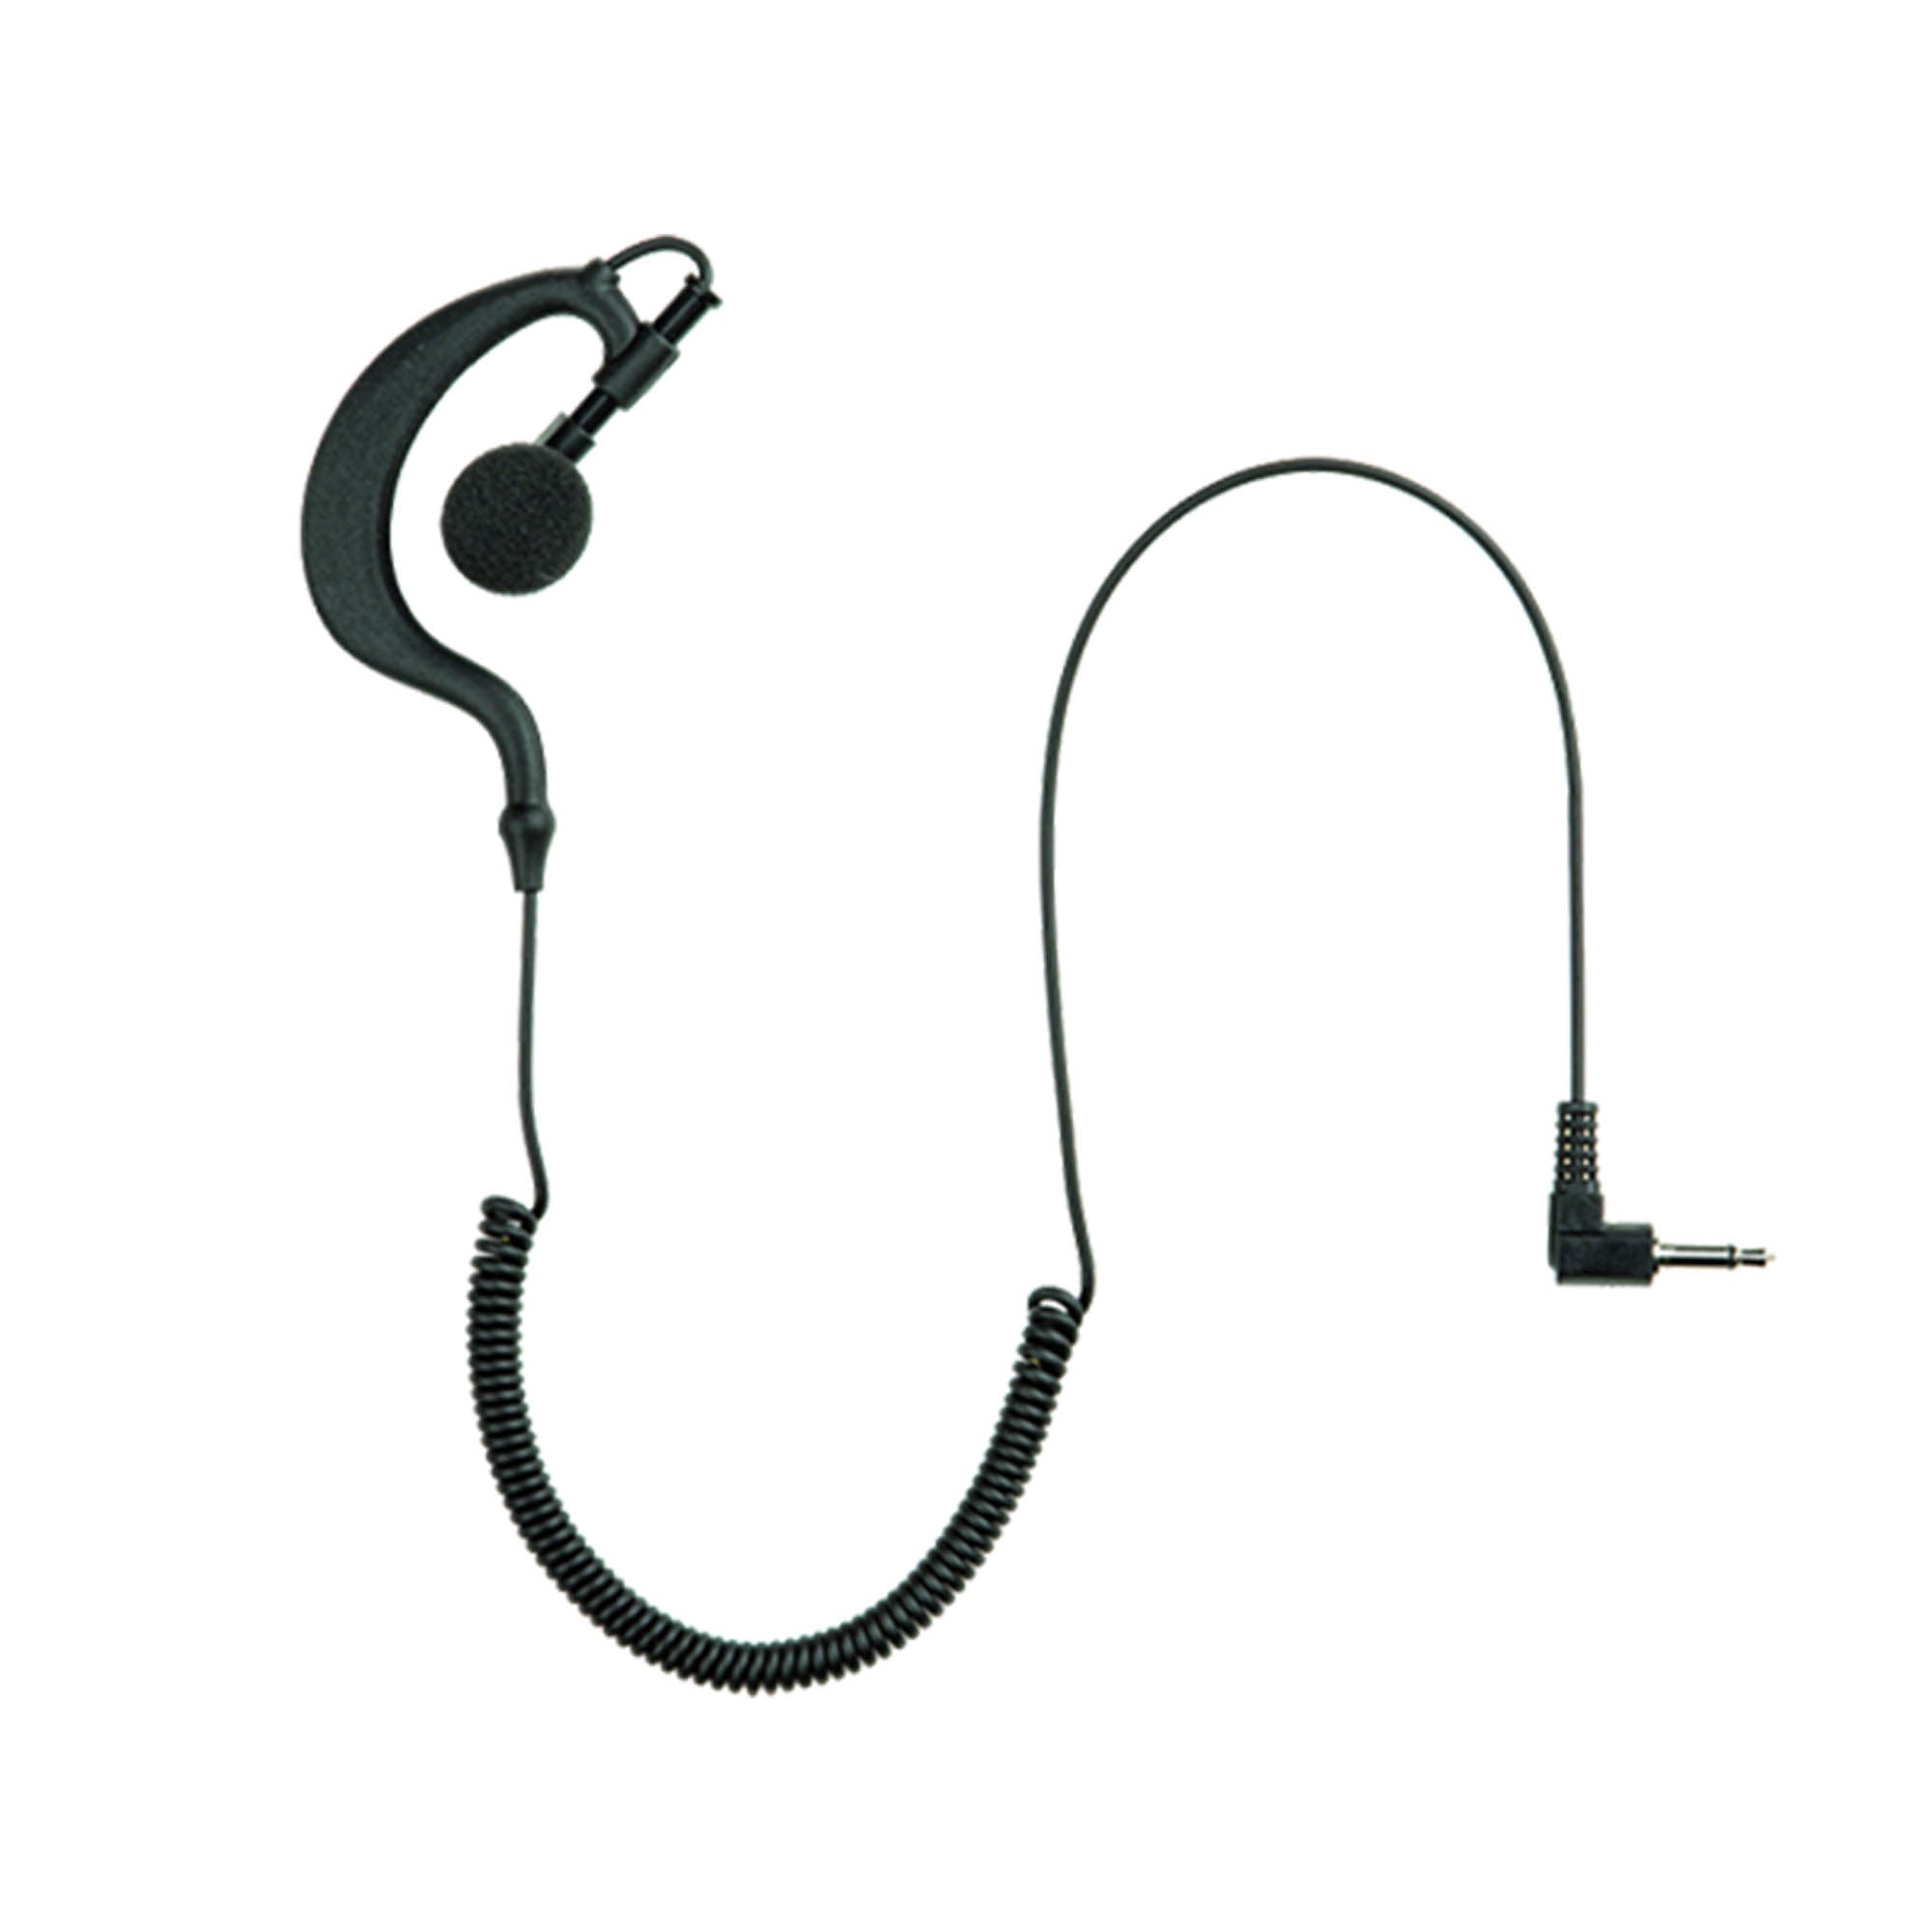 MH-100 3.5 mm Earpiece for Remote Speaker Mic Audio Jack